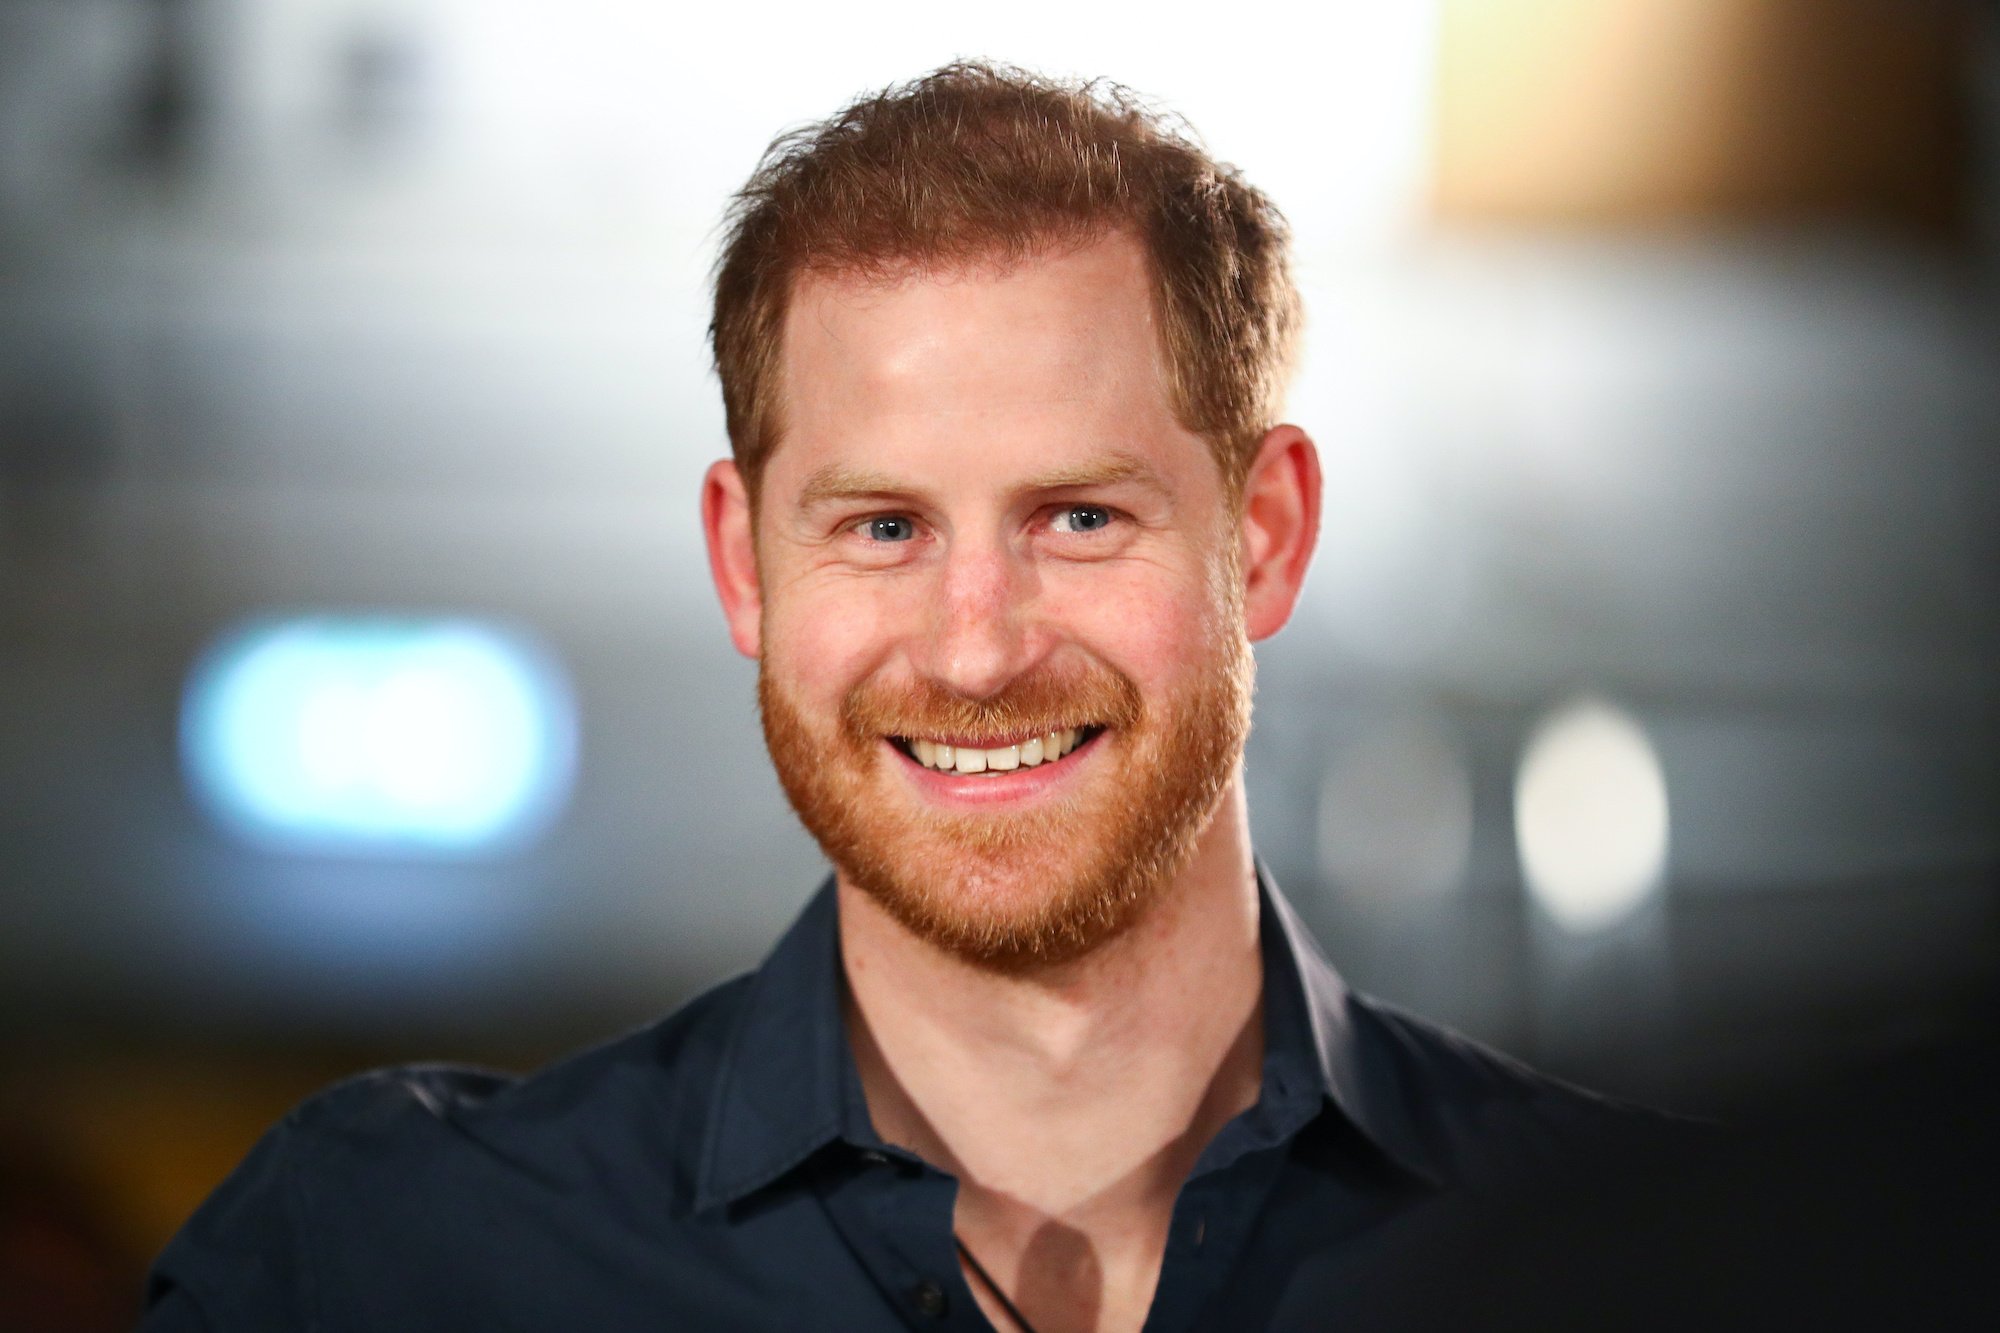 Prince Harry smiles in a black collared shirt as he looks on